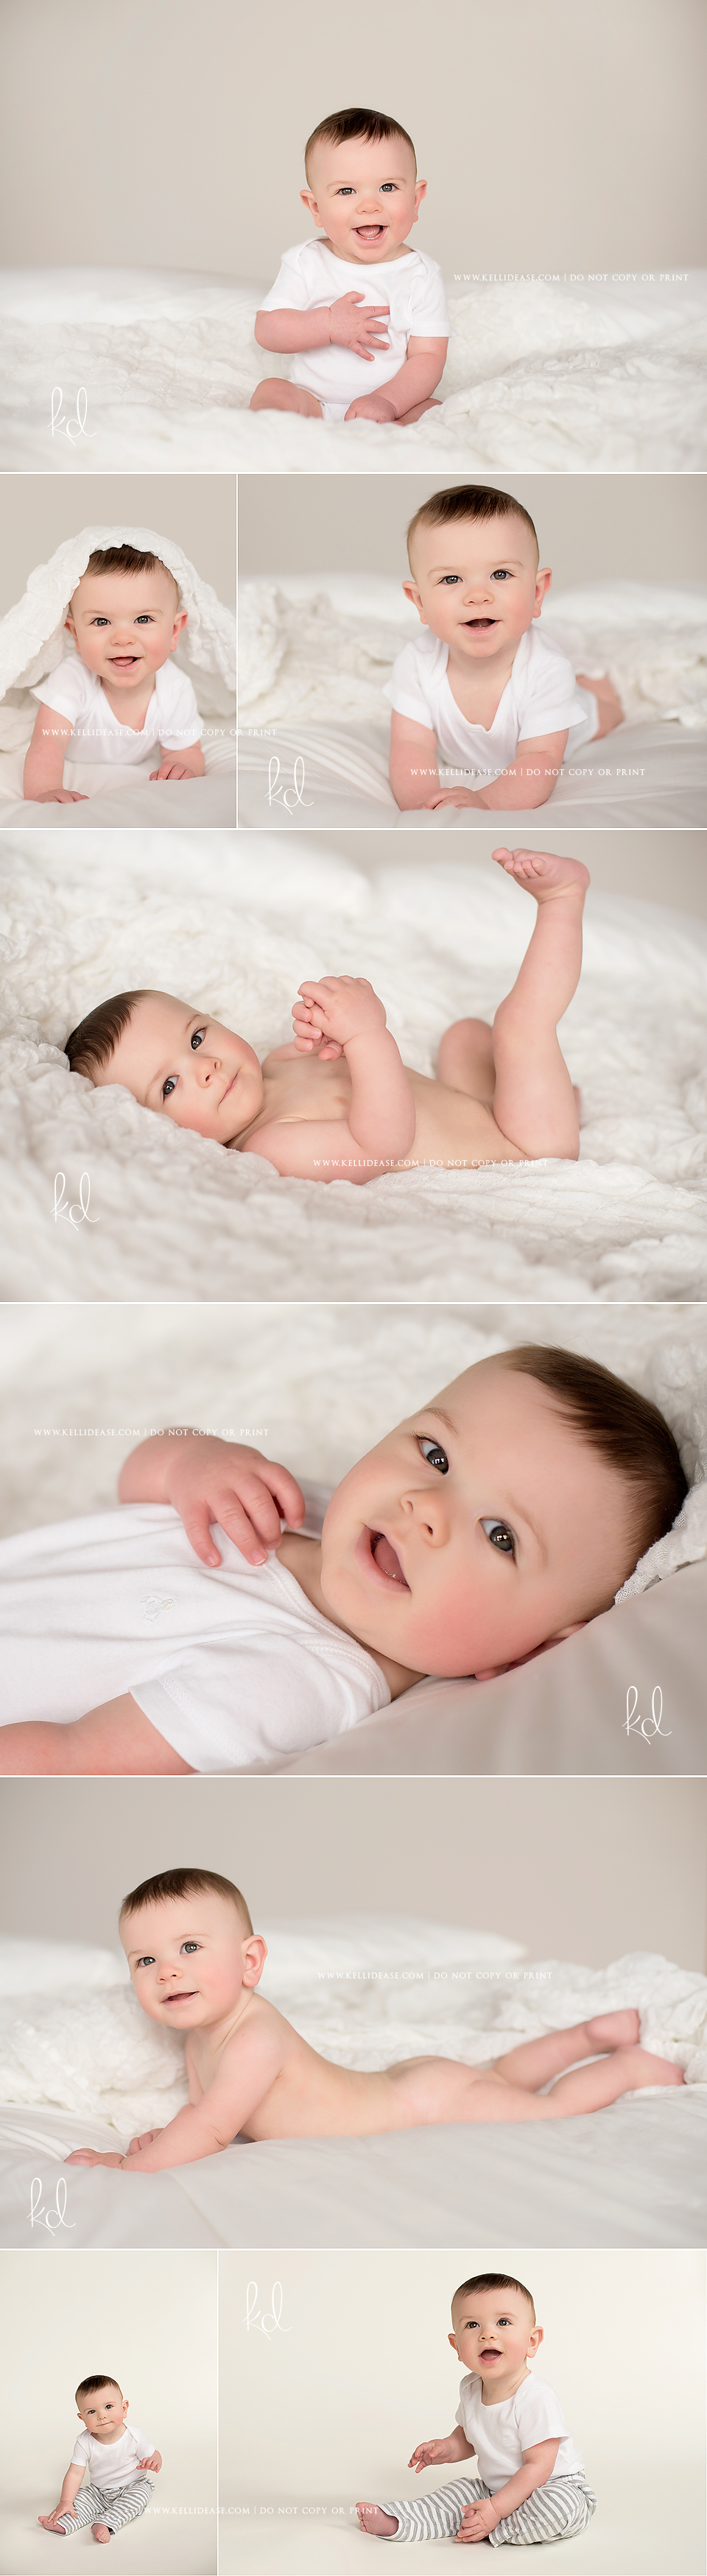 best baby photographers in CT and MA